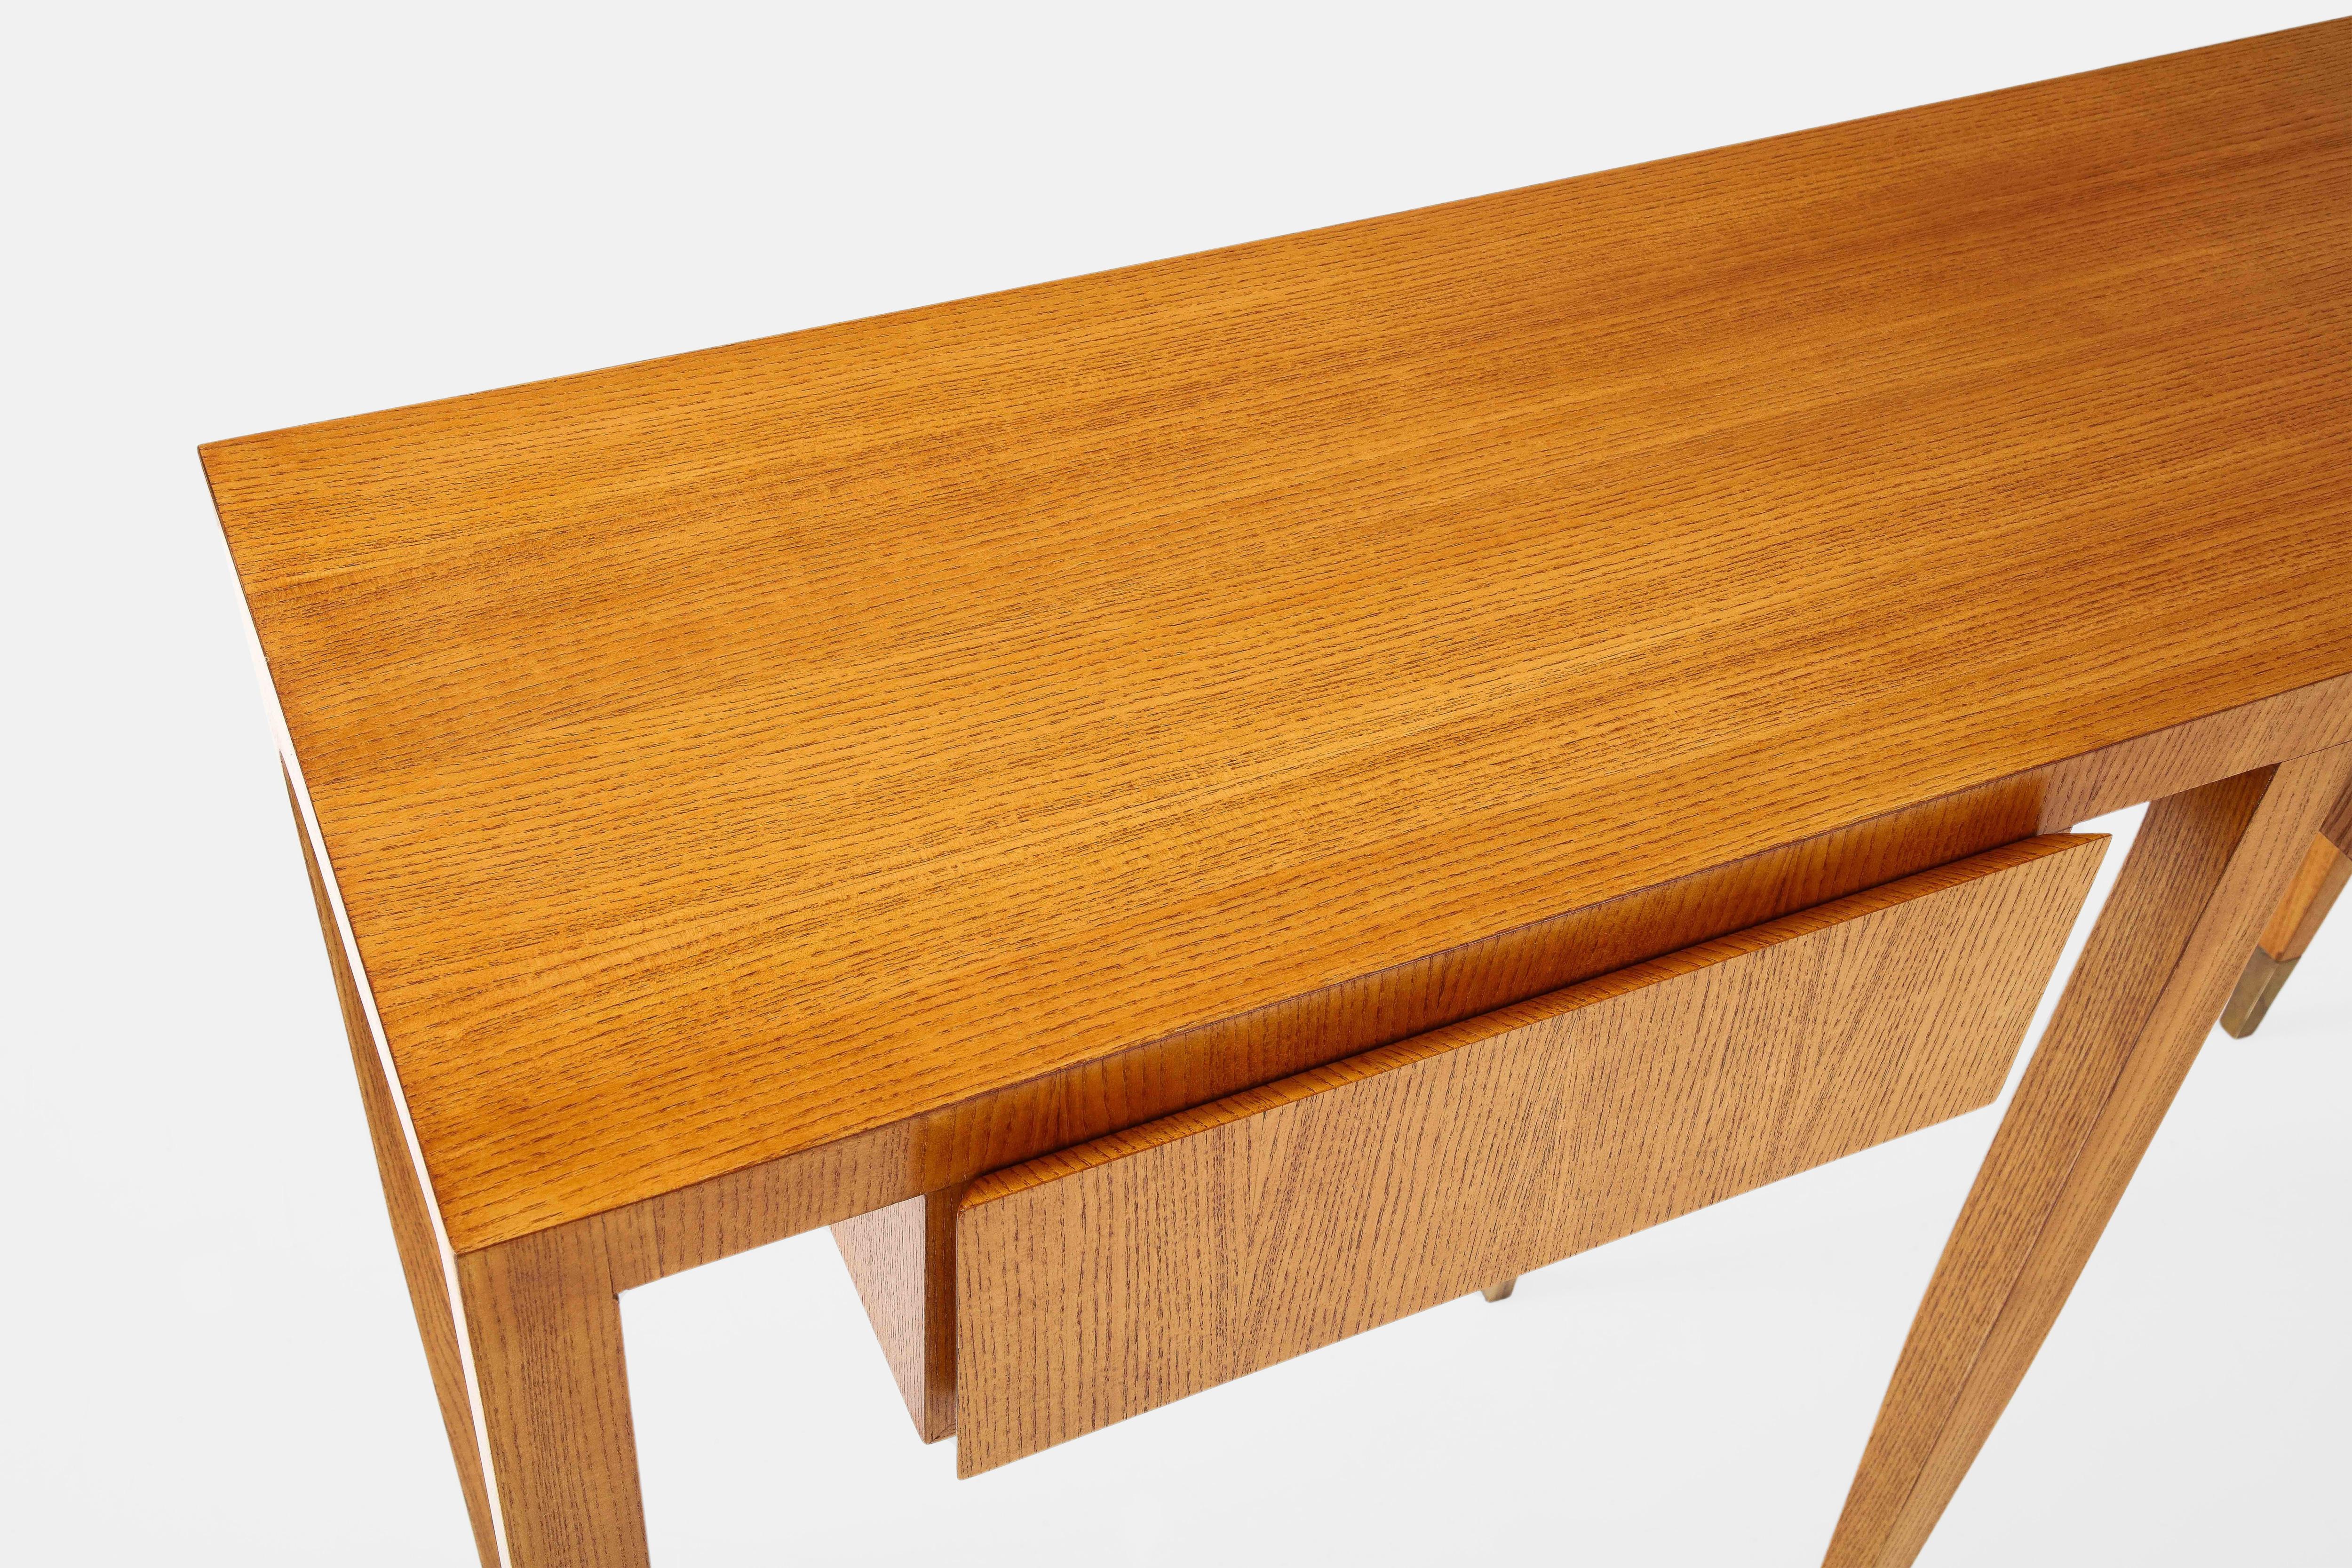 Gio Ponti for Giordano Chiesa Rare Pair of Ash Wood Consoles, Italy, 1950s For Sale 5